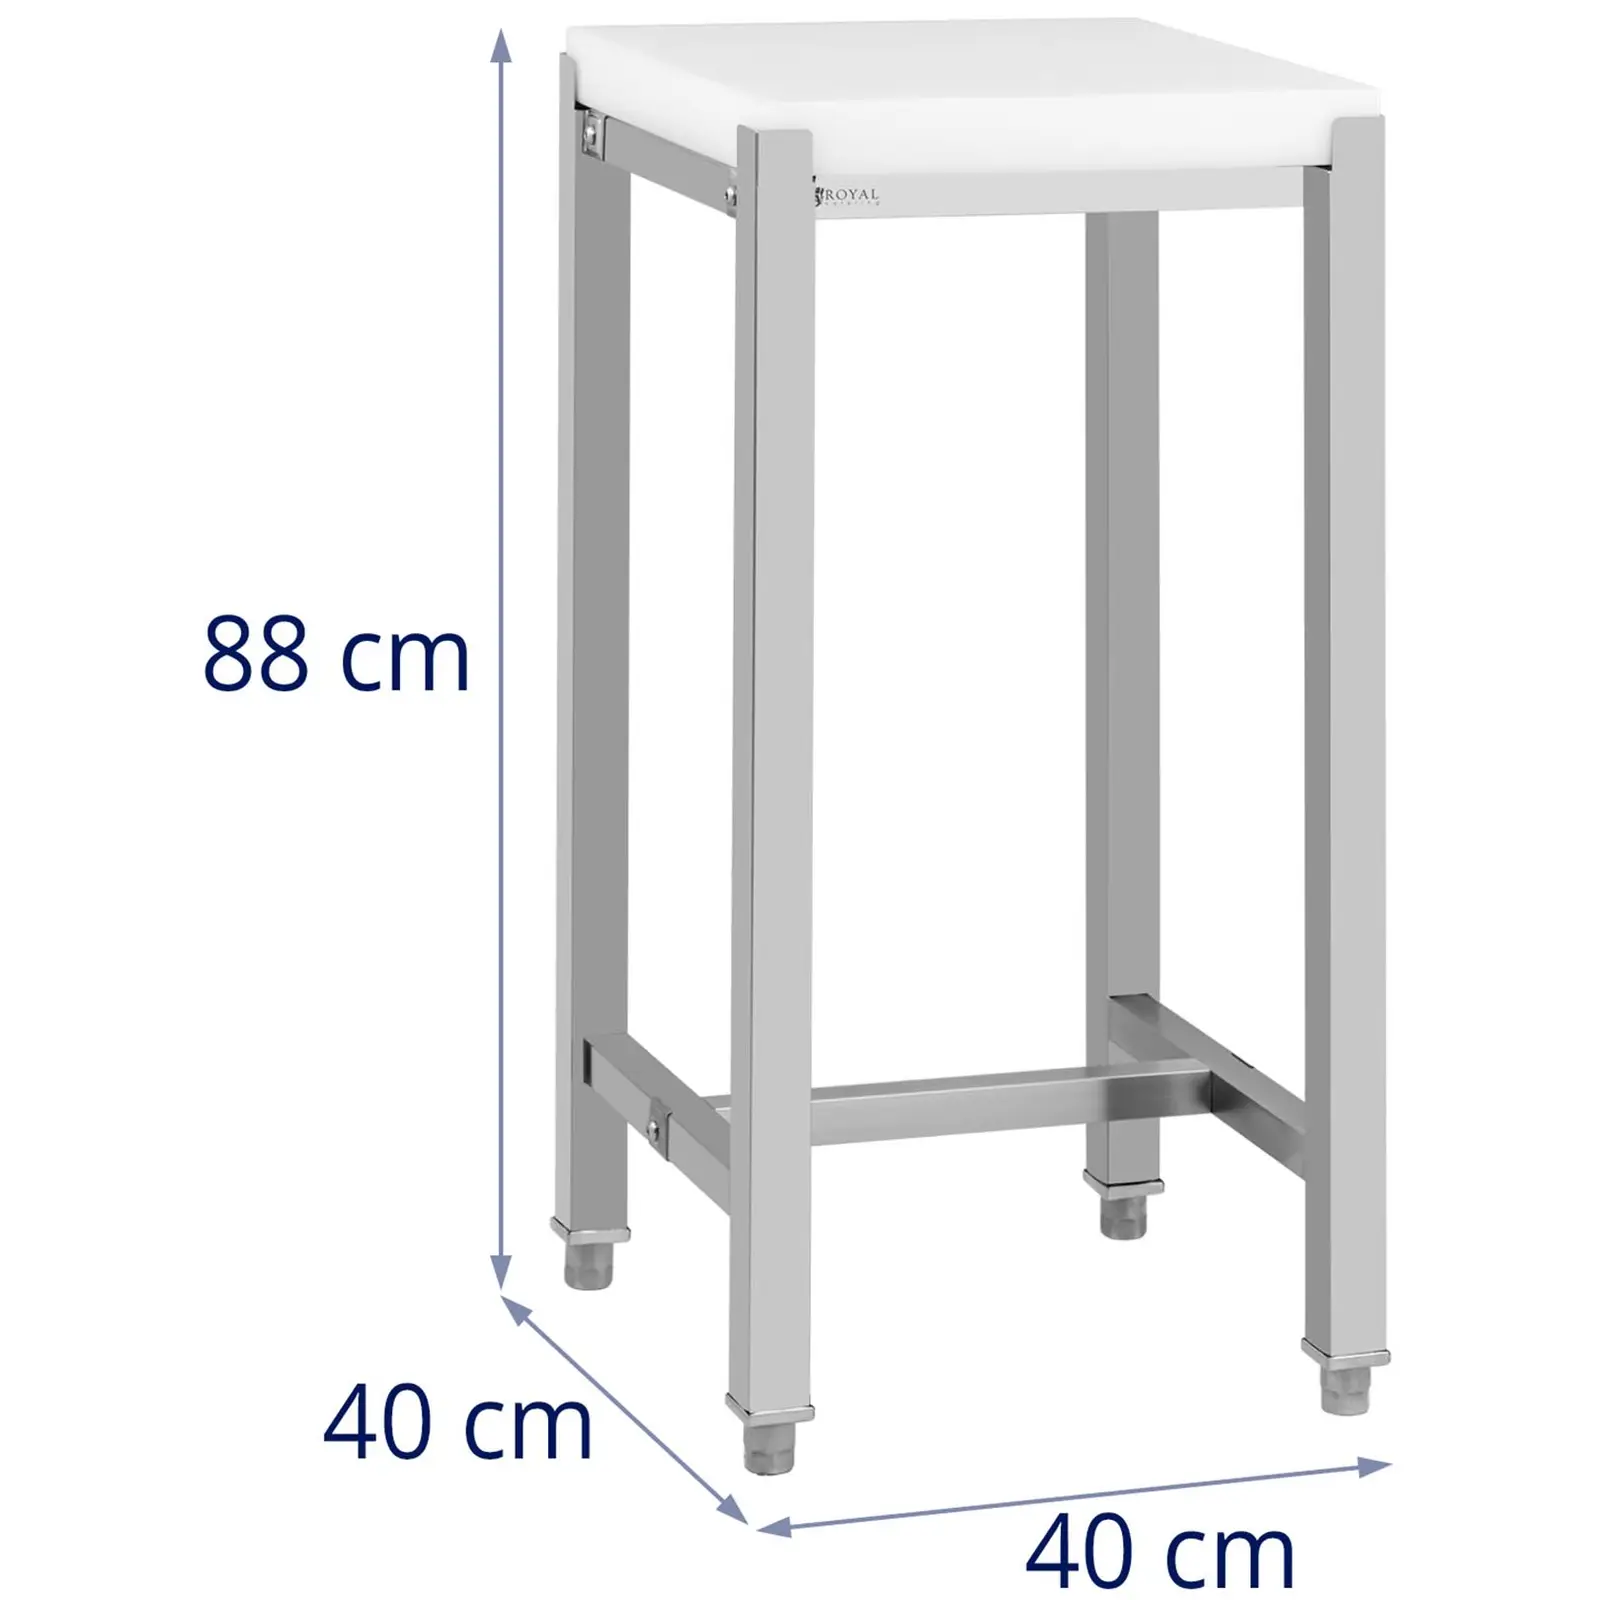 Factory second Butcher block - Stainless Steel - Working height: 40 cm